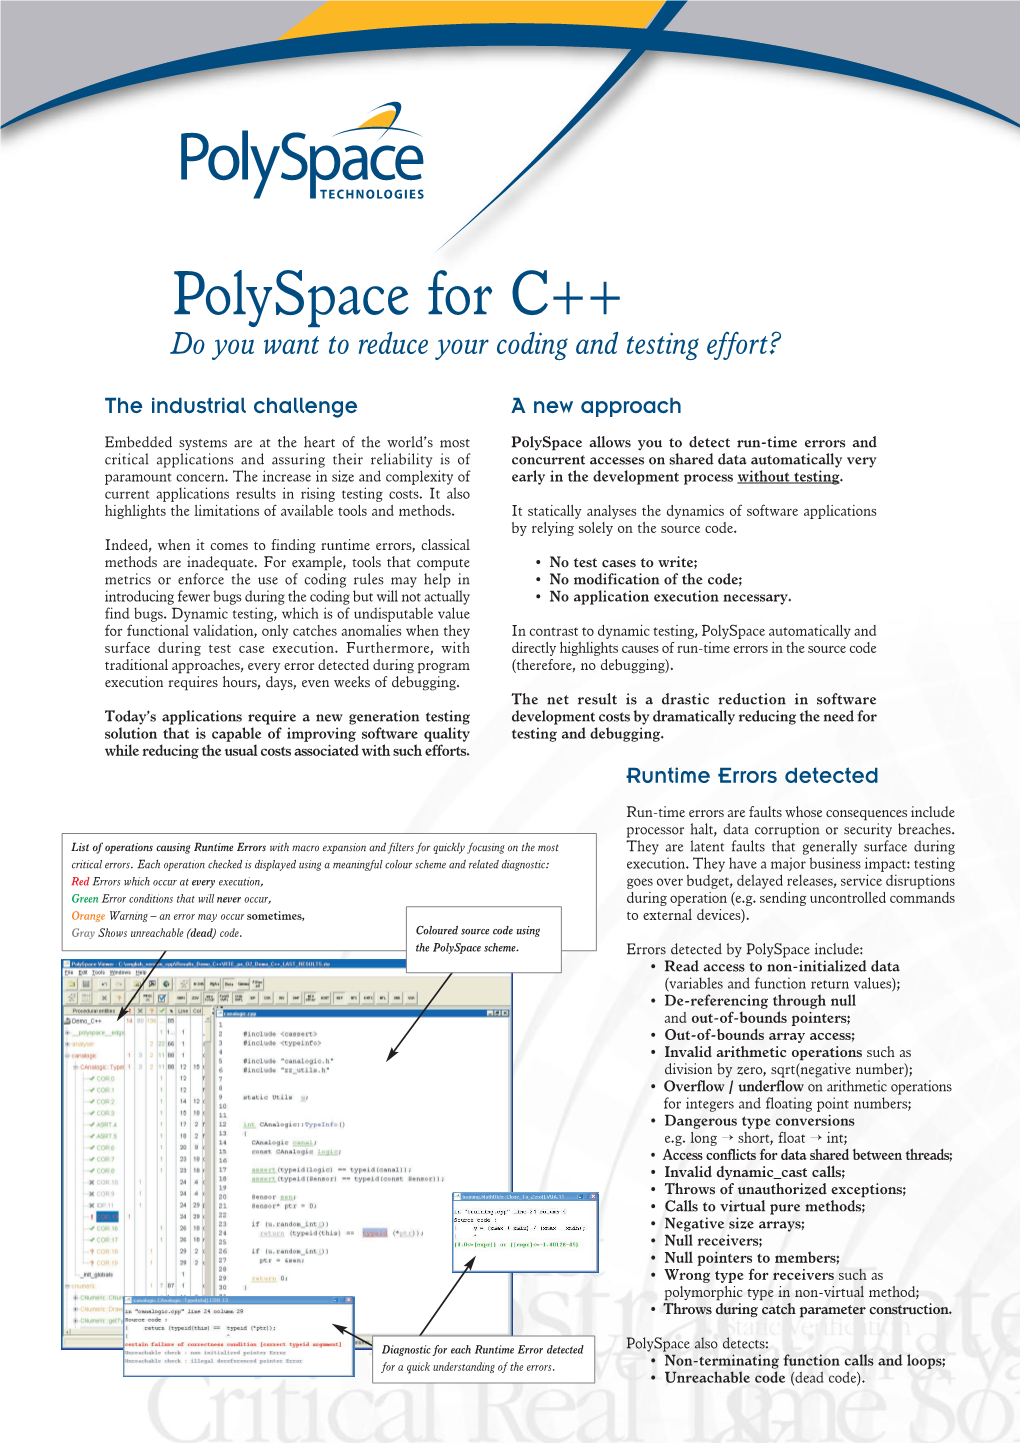 Polyspace for C++ Do You Want to Reduce Your Coding and Testing Effort?